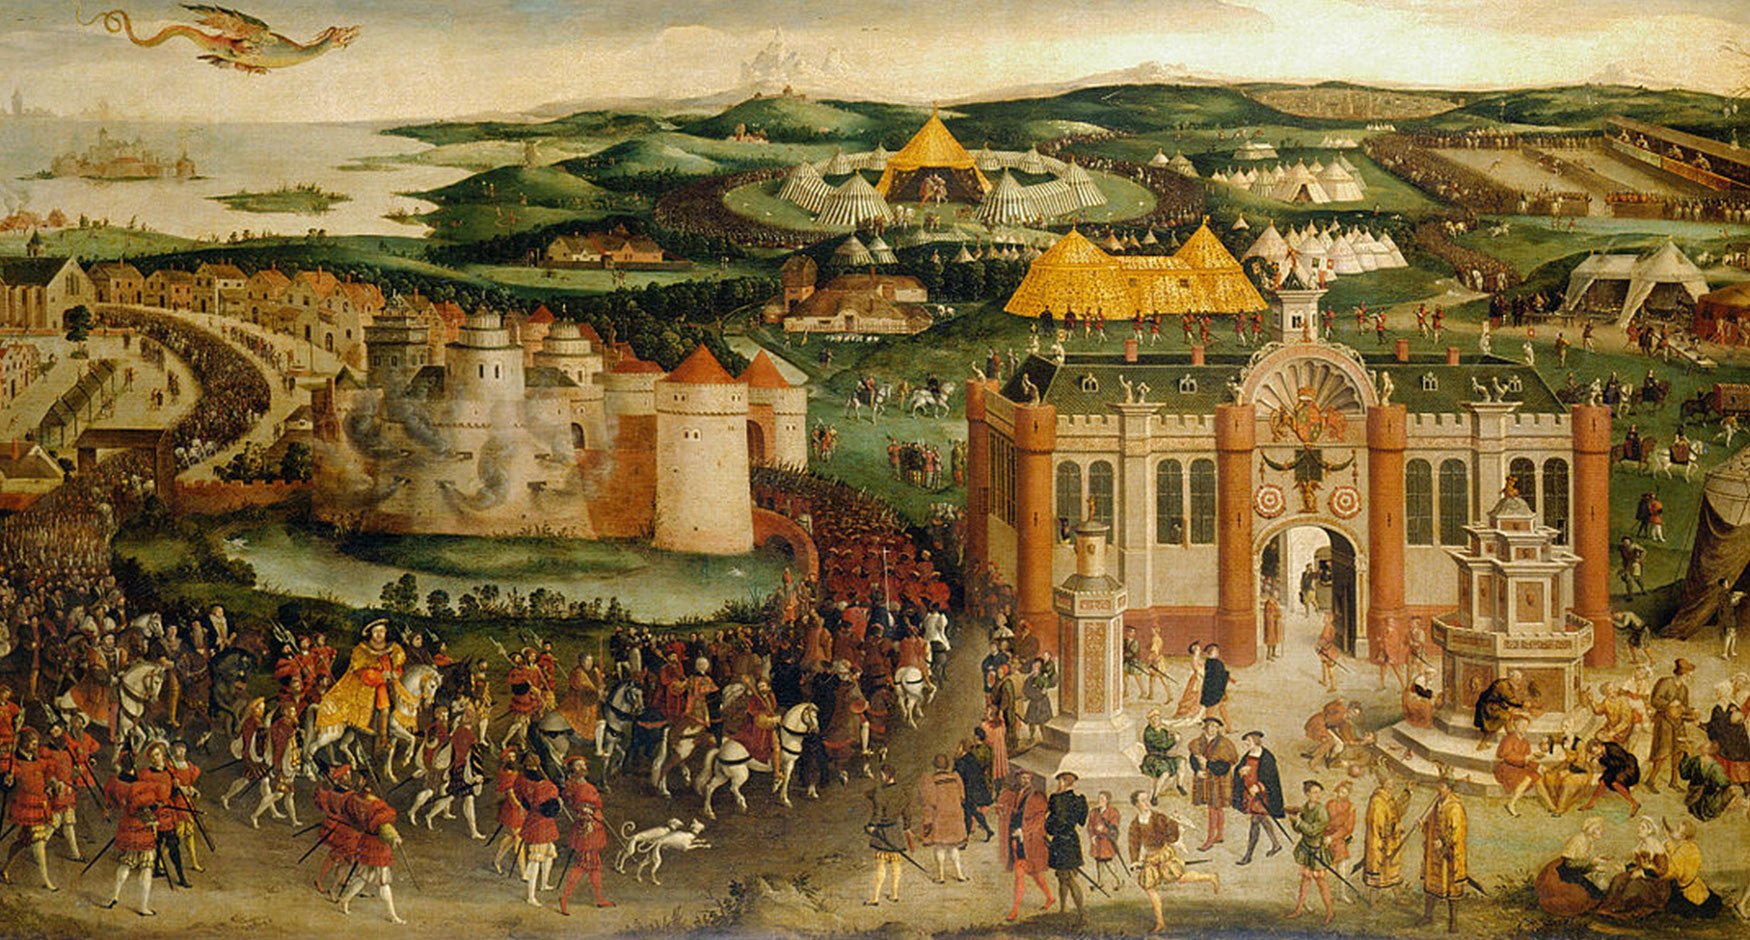 7- June 24 1520: The Field of the Cloth of Gold